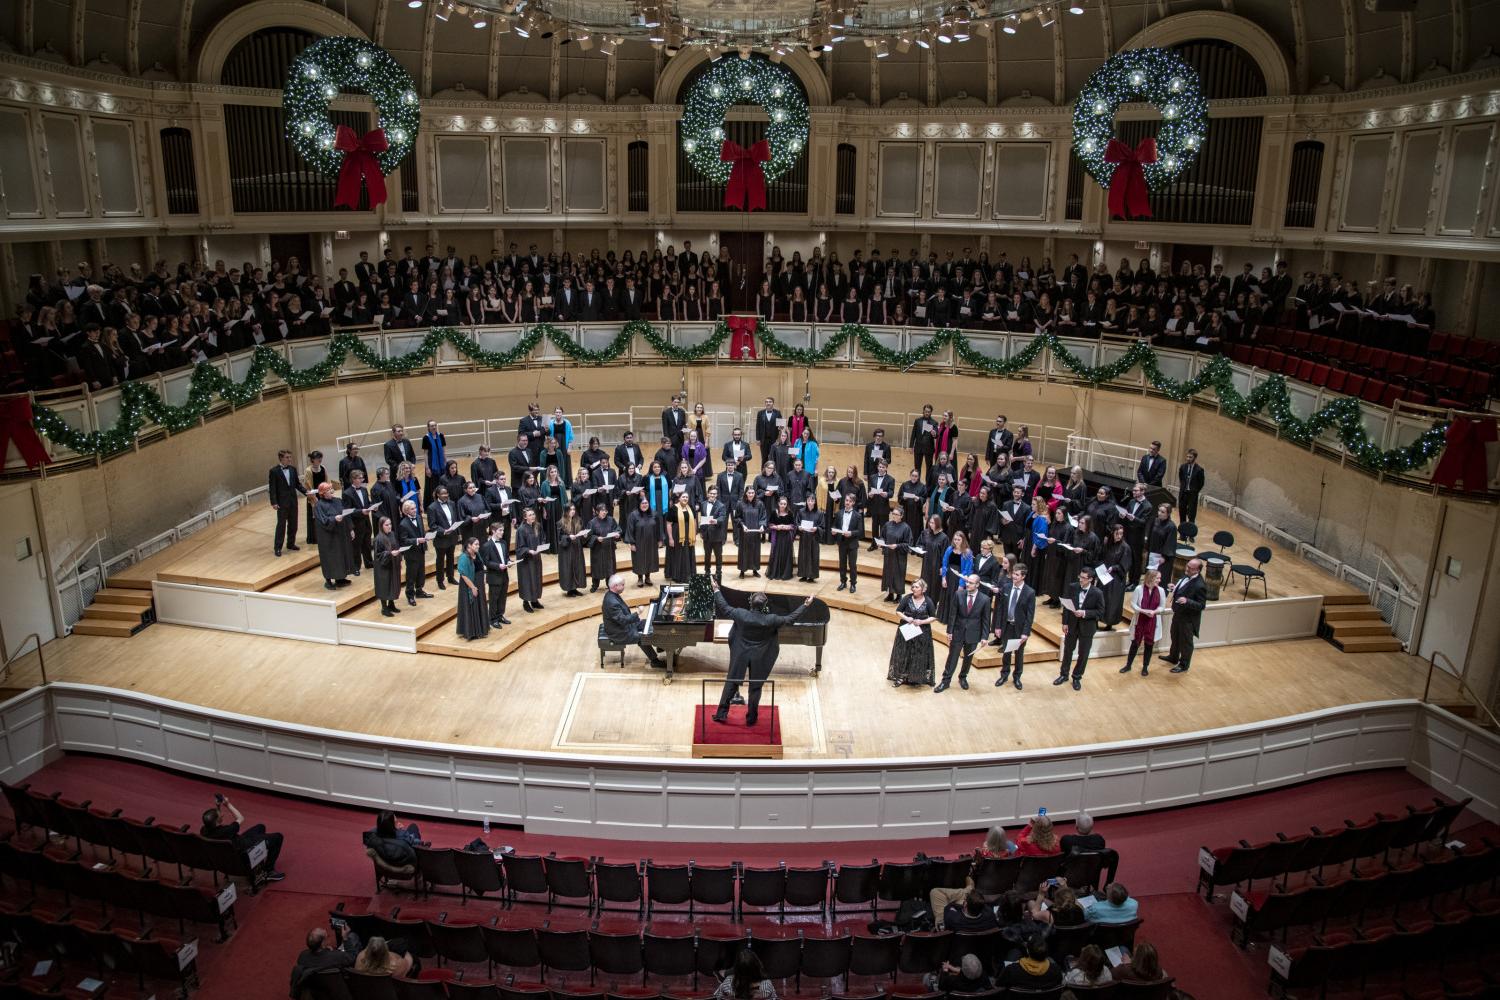 The <a href='http://4n1.uncsj.com'>bv伟德ios下载</a> Choir performs in the Chicago Symphony Hall.